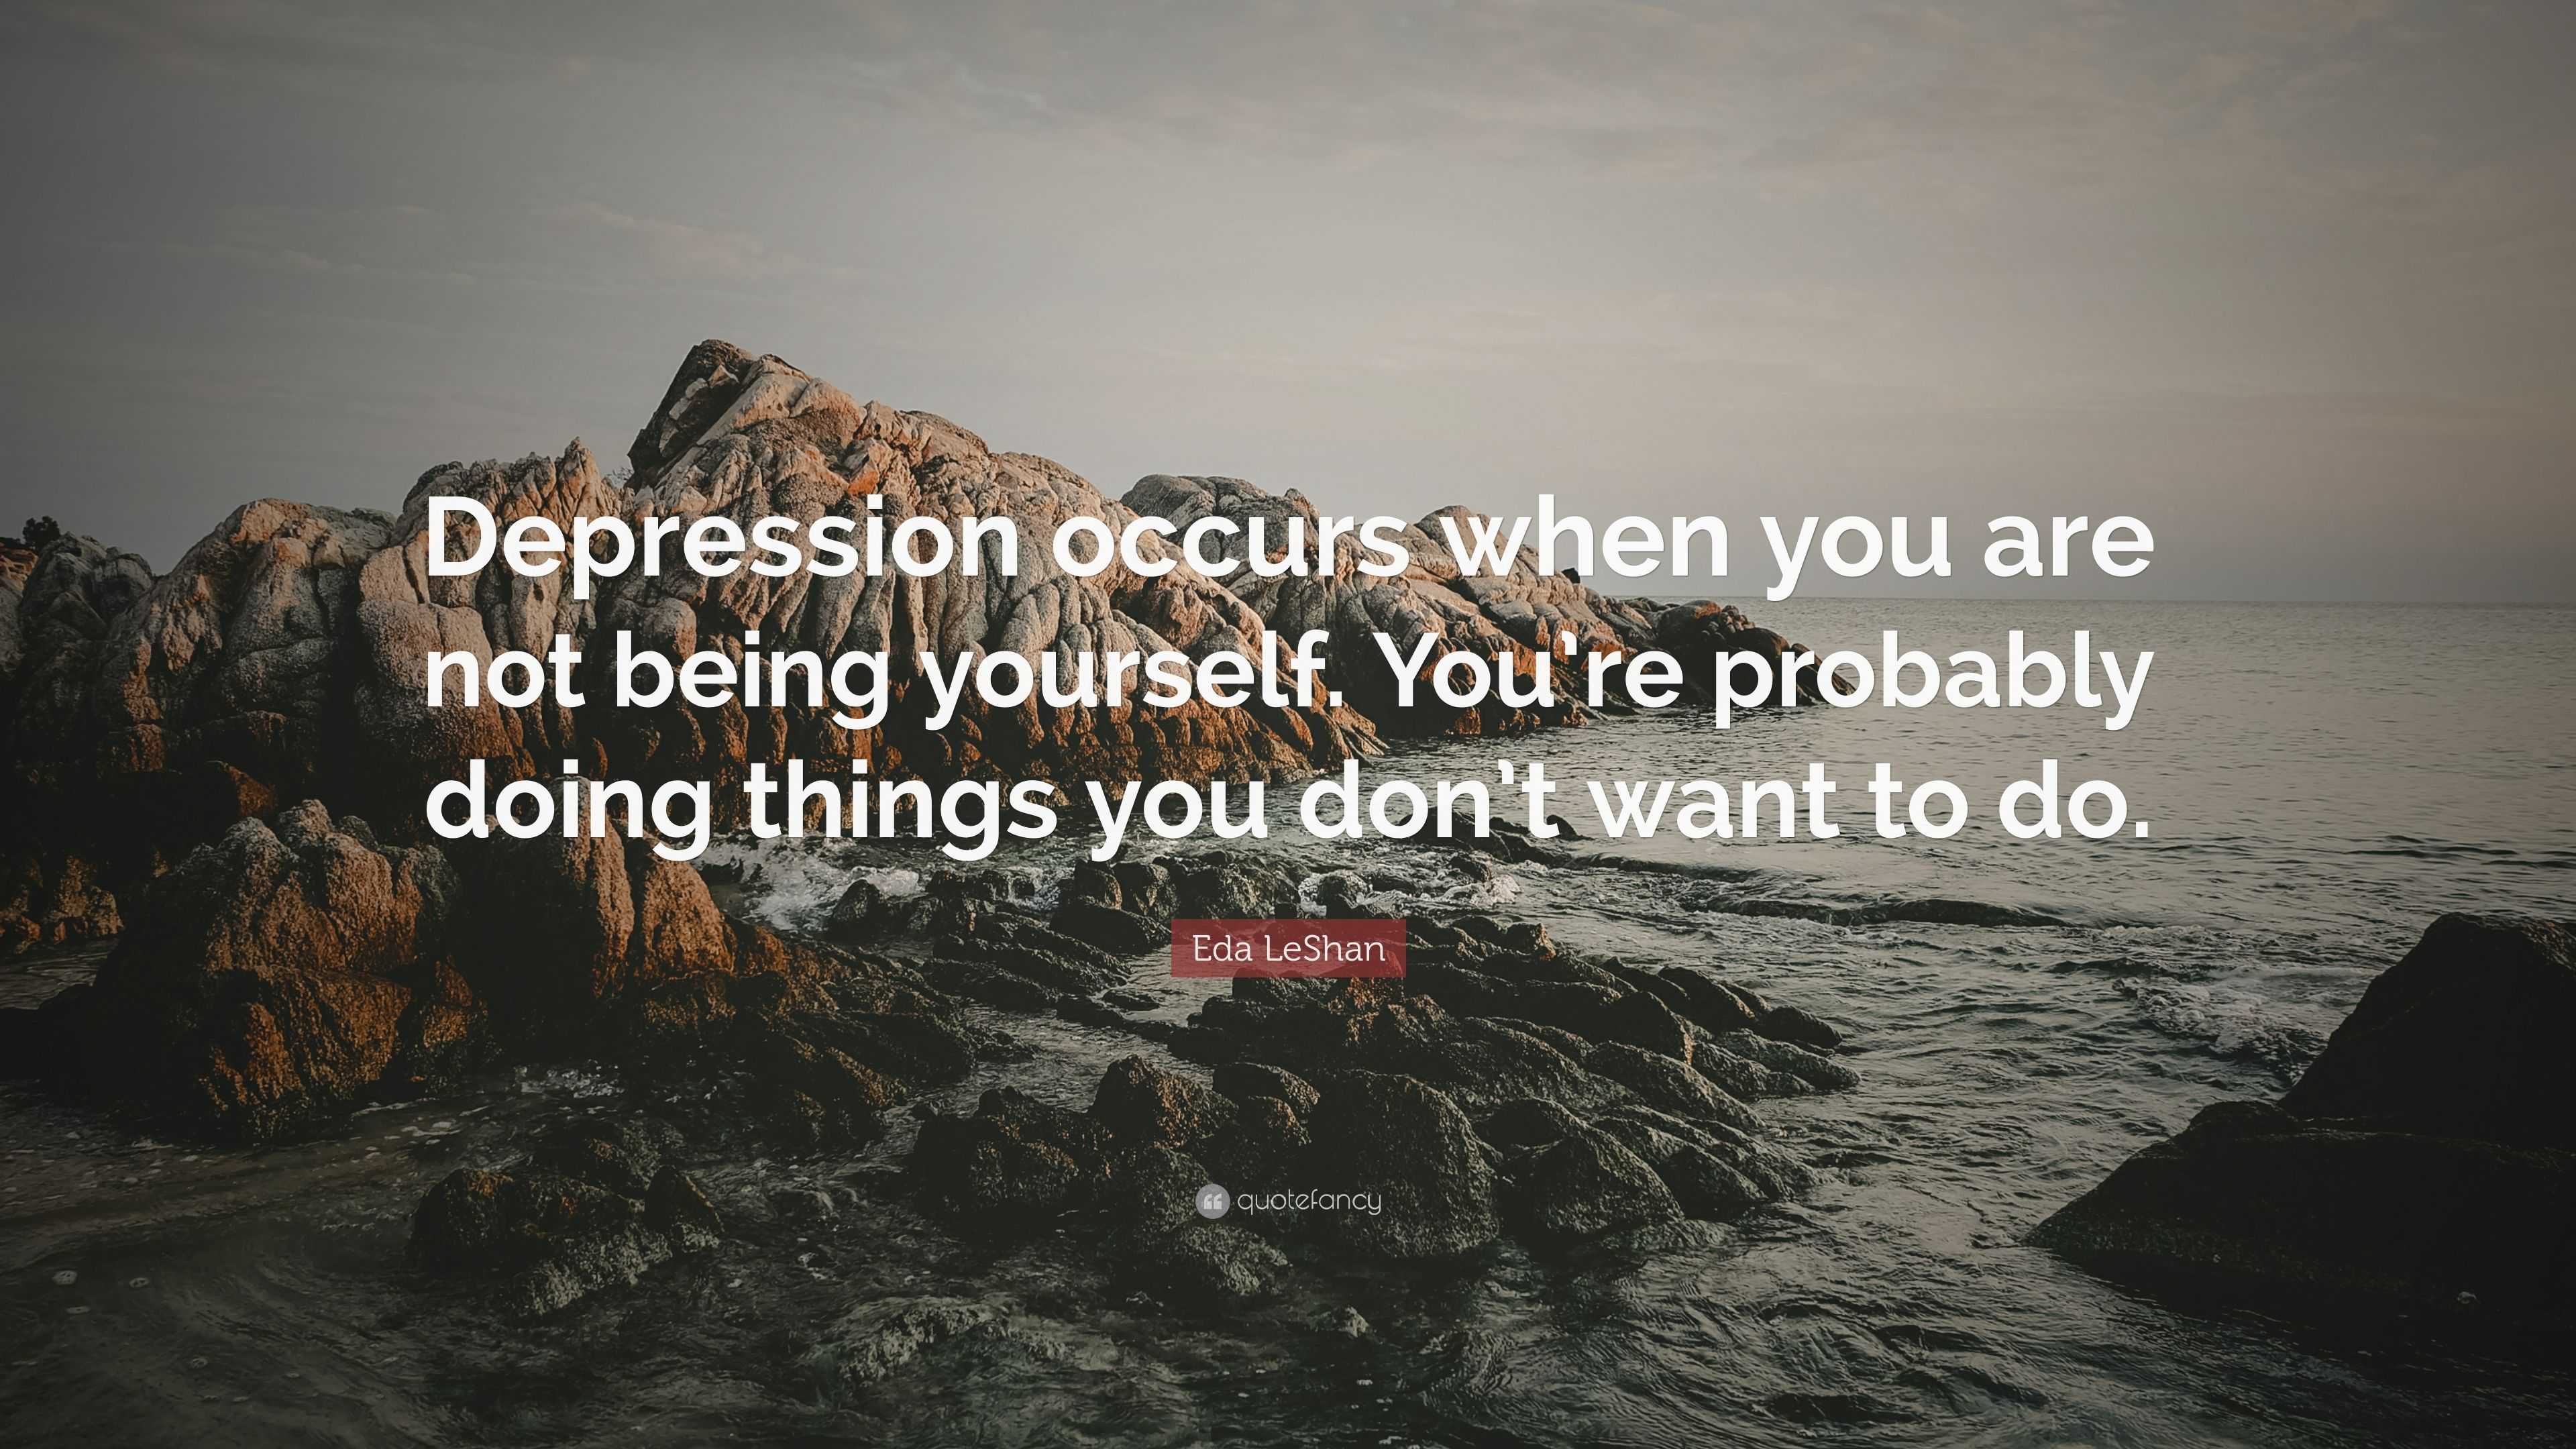 Eda LeShan Quote: “Depression occurs when you are not being yourself ...